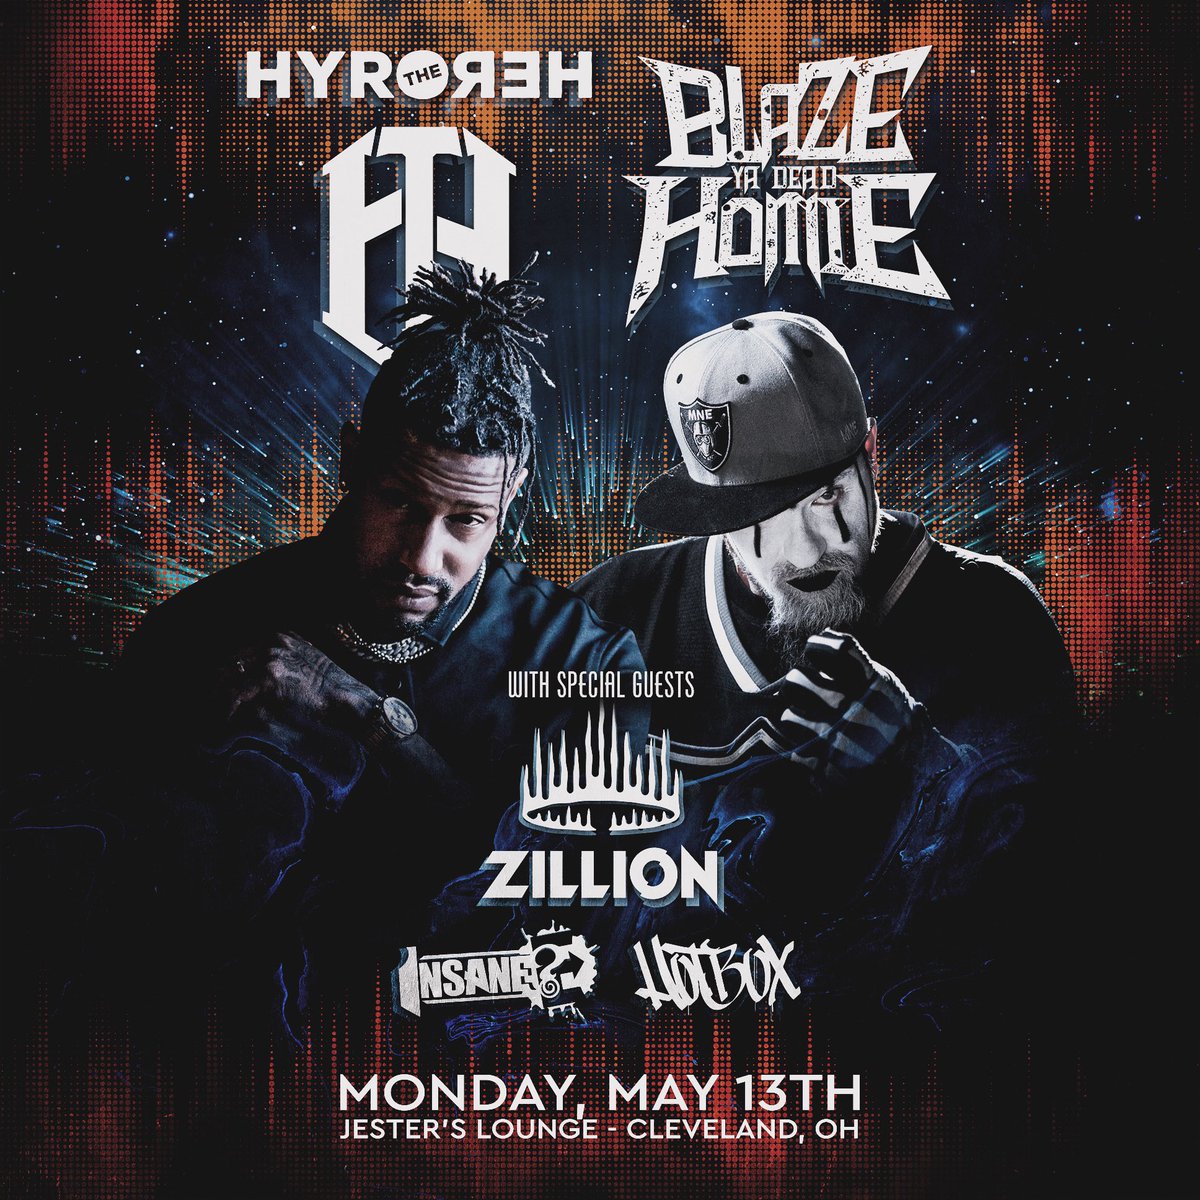 Don’t miss @BlazeYaDead1 , @hyrothehero , Zillion , @InsaneEric and Hot Box LIVE this Monday, May 13th at Jesters Lounge in Cleveland🔥